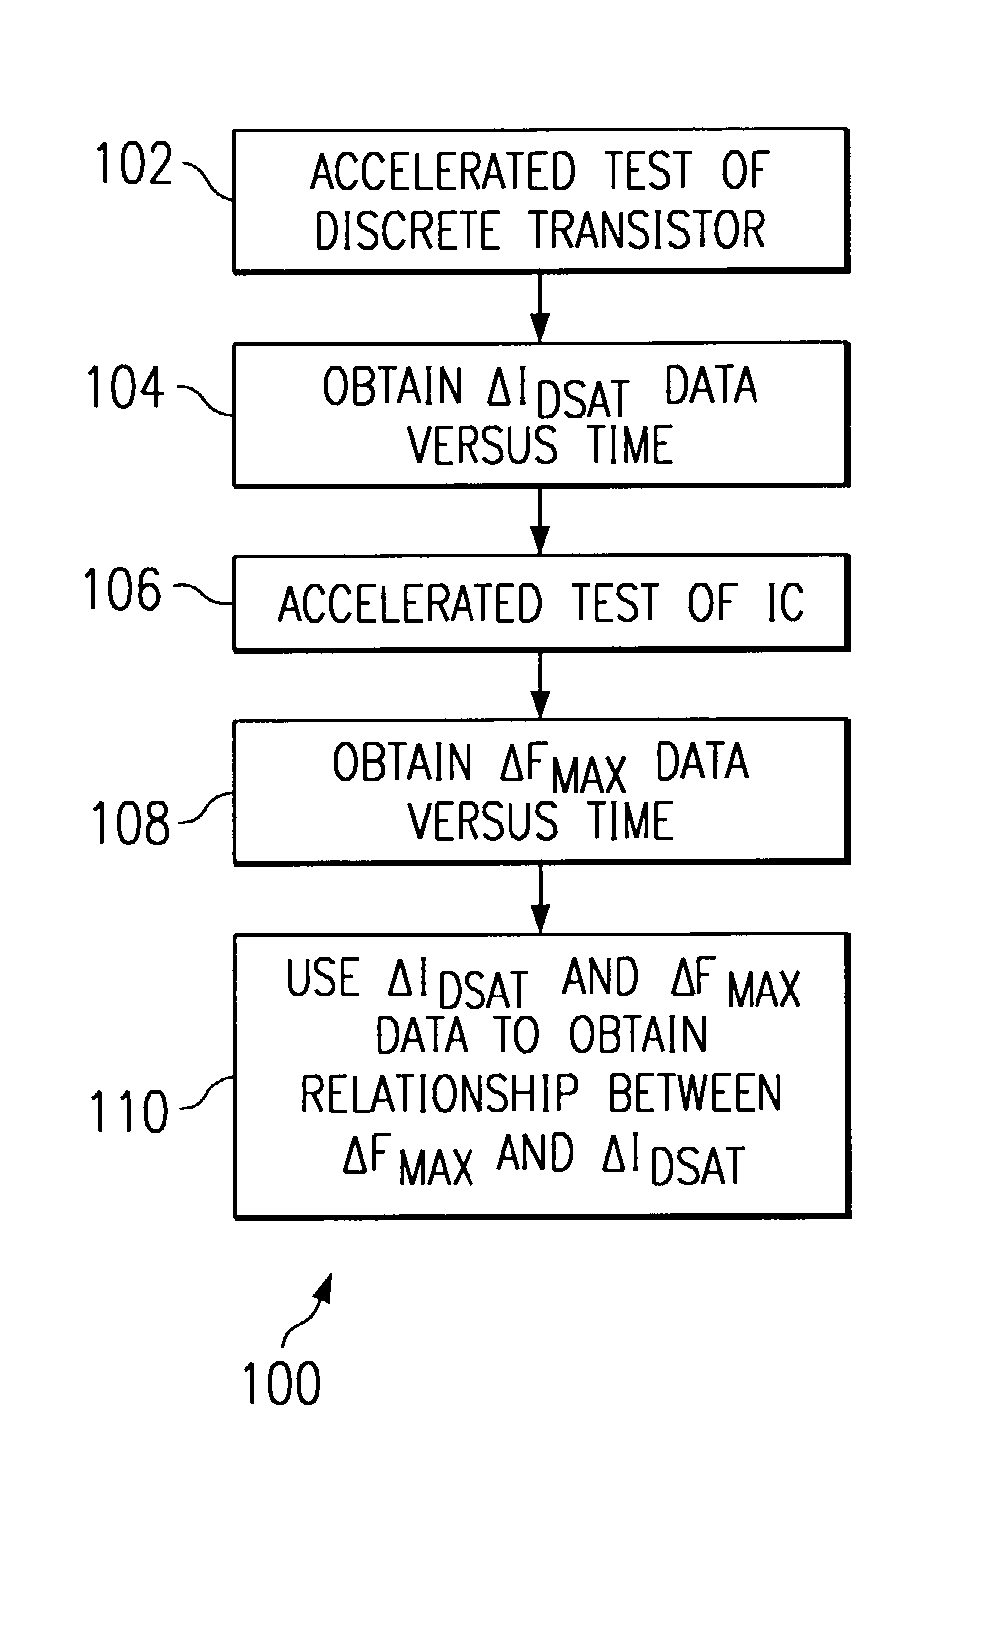 Method for predicting the degradation of an integrated circuit performance due to negative bias temperature instability